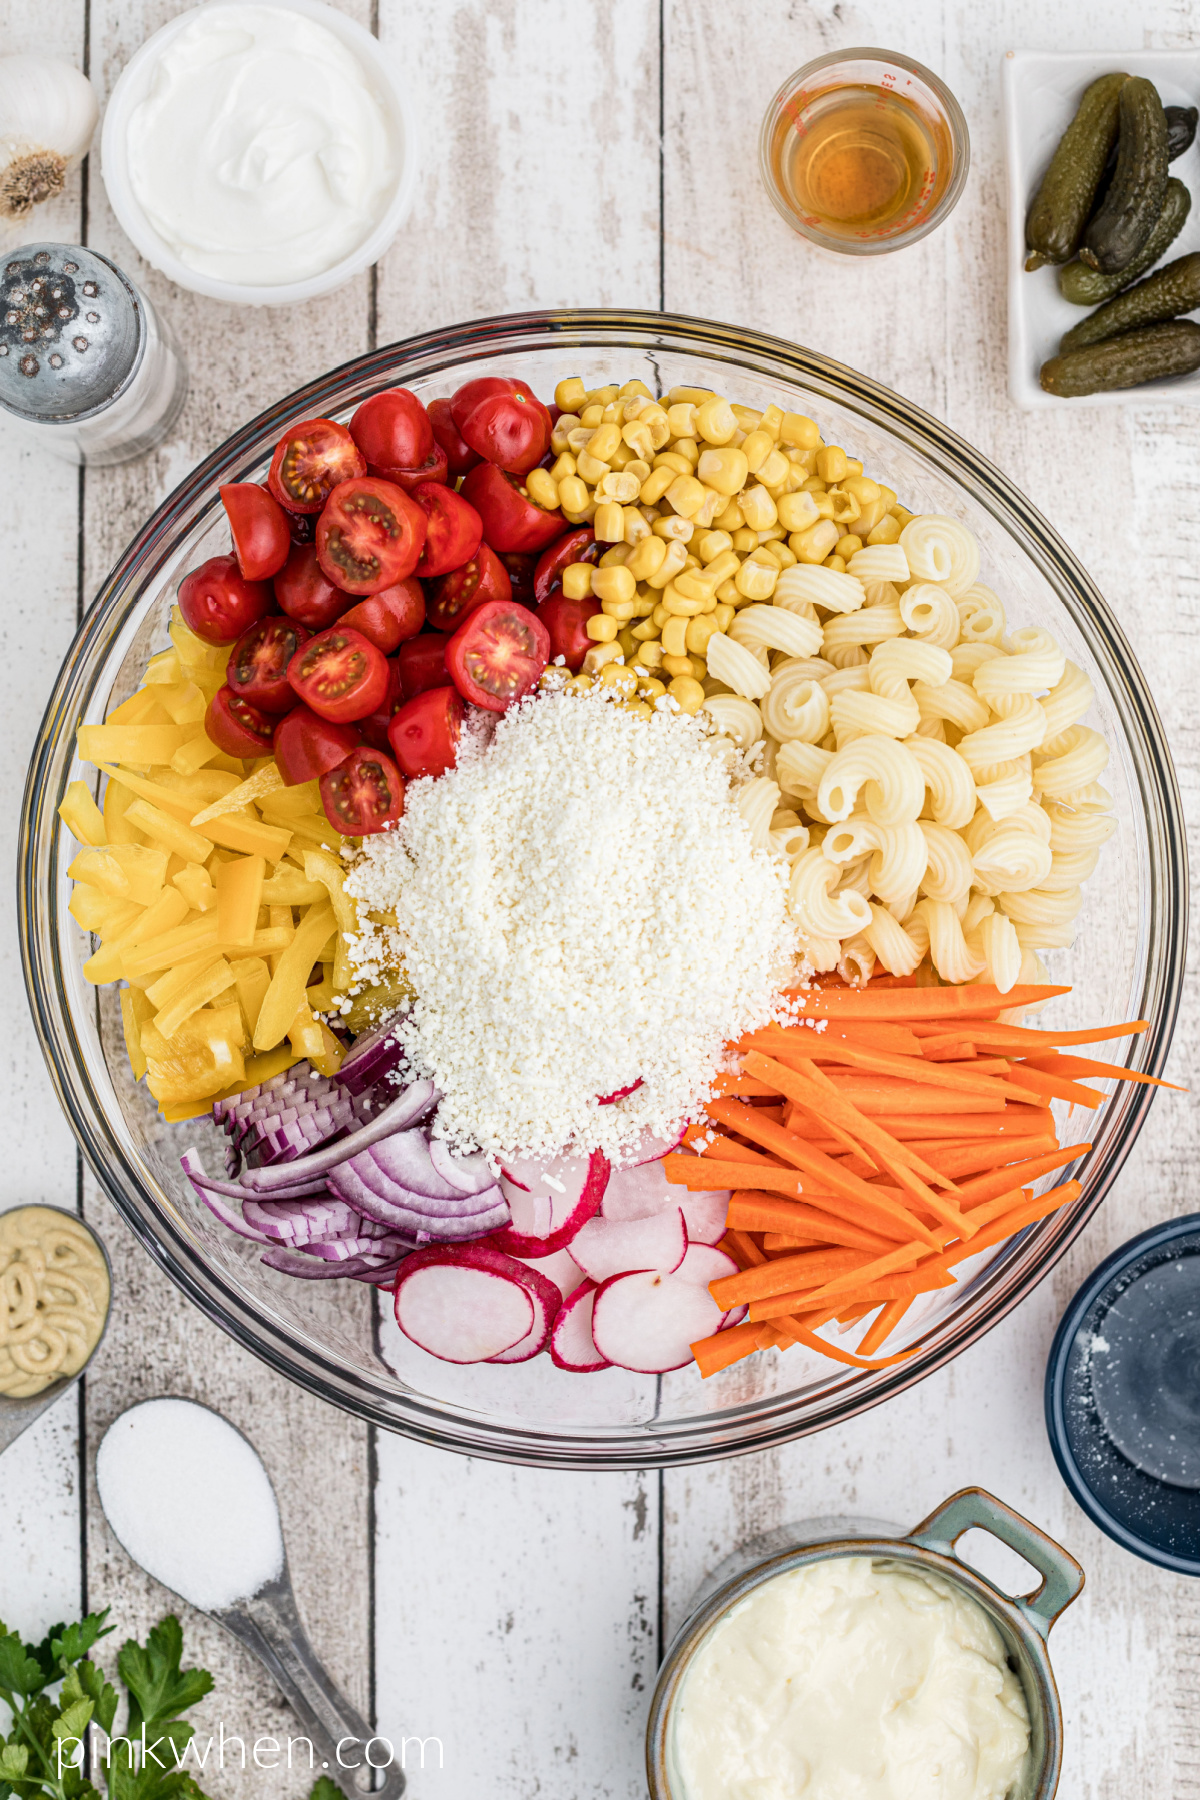 Ingredients for a summer pasta salad added to a large mixing bowl.